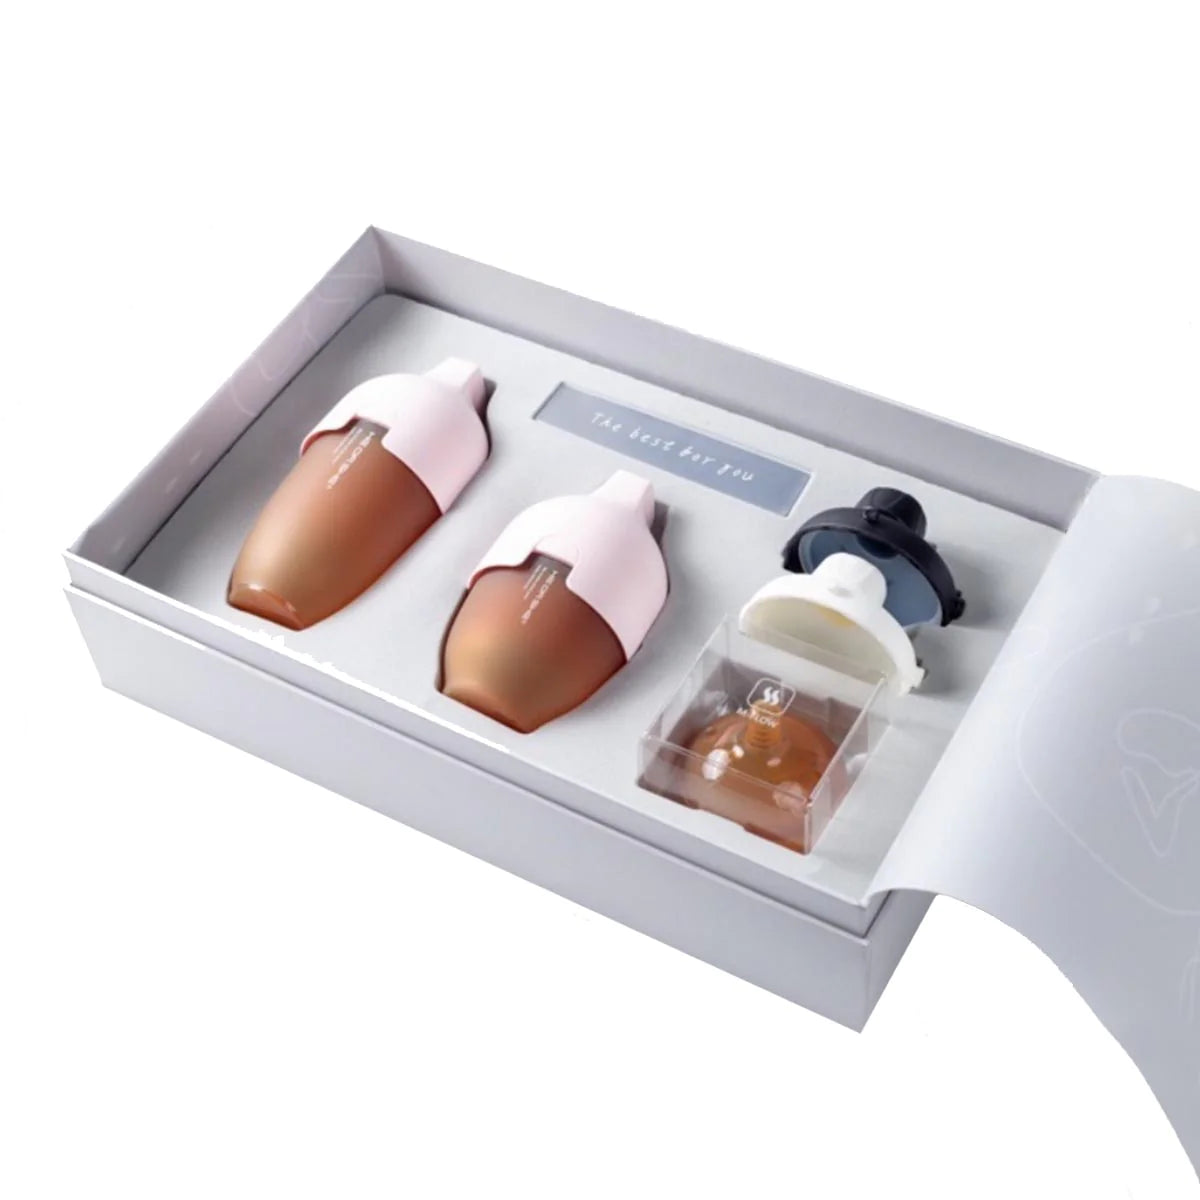 He or She Ultra Wide Neck Baby Bottle Premium Gift Set